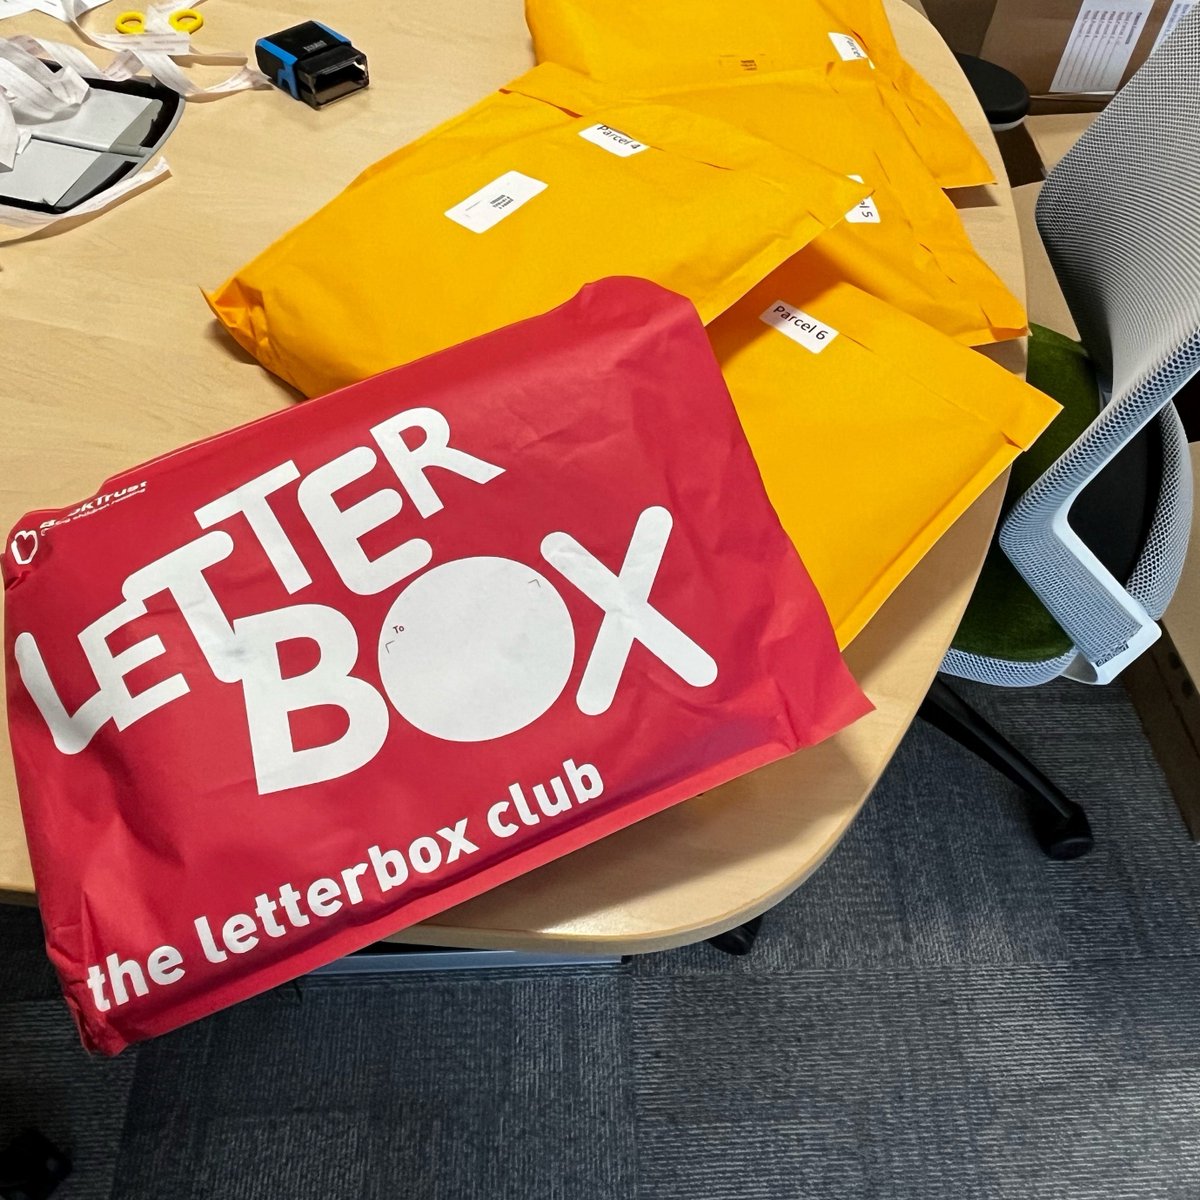 We're nearly at the end of the academic year, and some of the SVS team have been very busy in the office today, getting ready goody bags for the #Surrey Children's Summer Event happening at the weekend! We have also been sending our #LetterboxClub parcels from @Booktrust 🎉📚